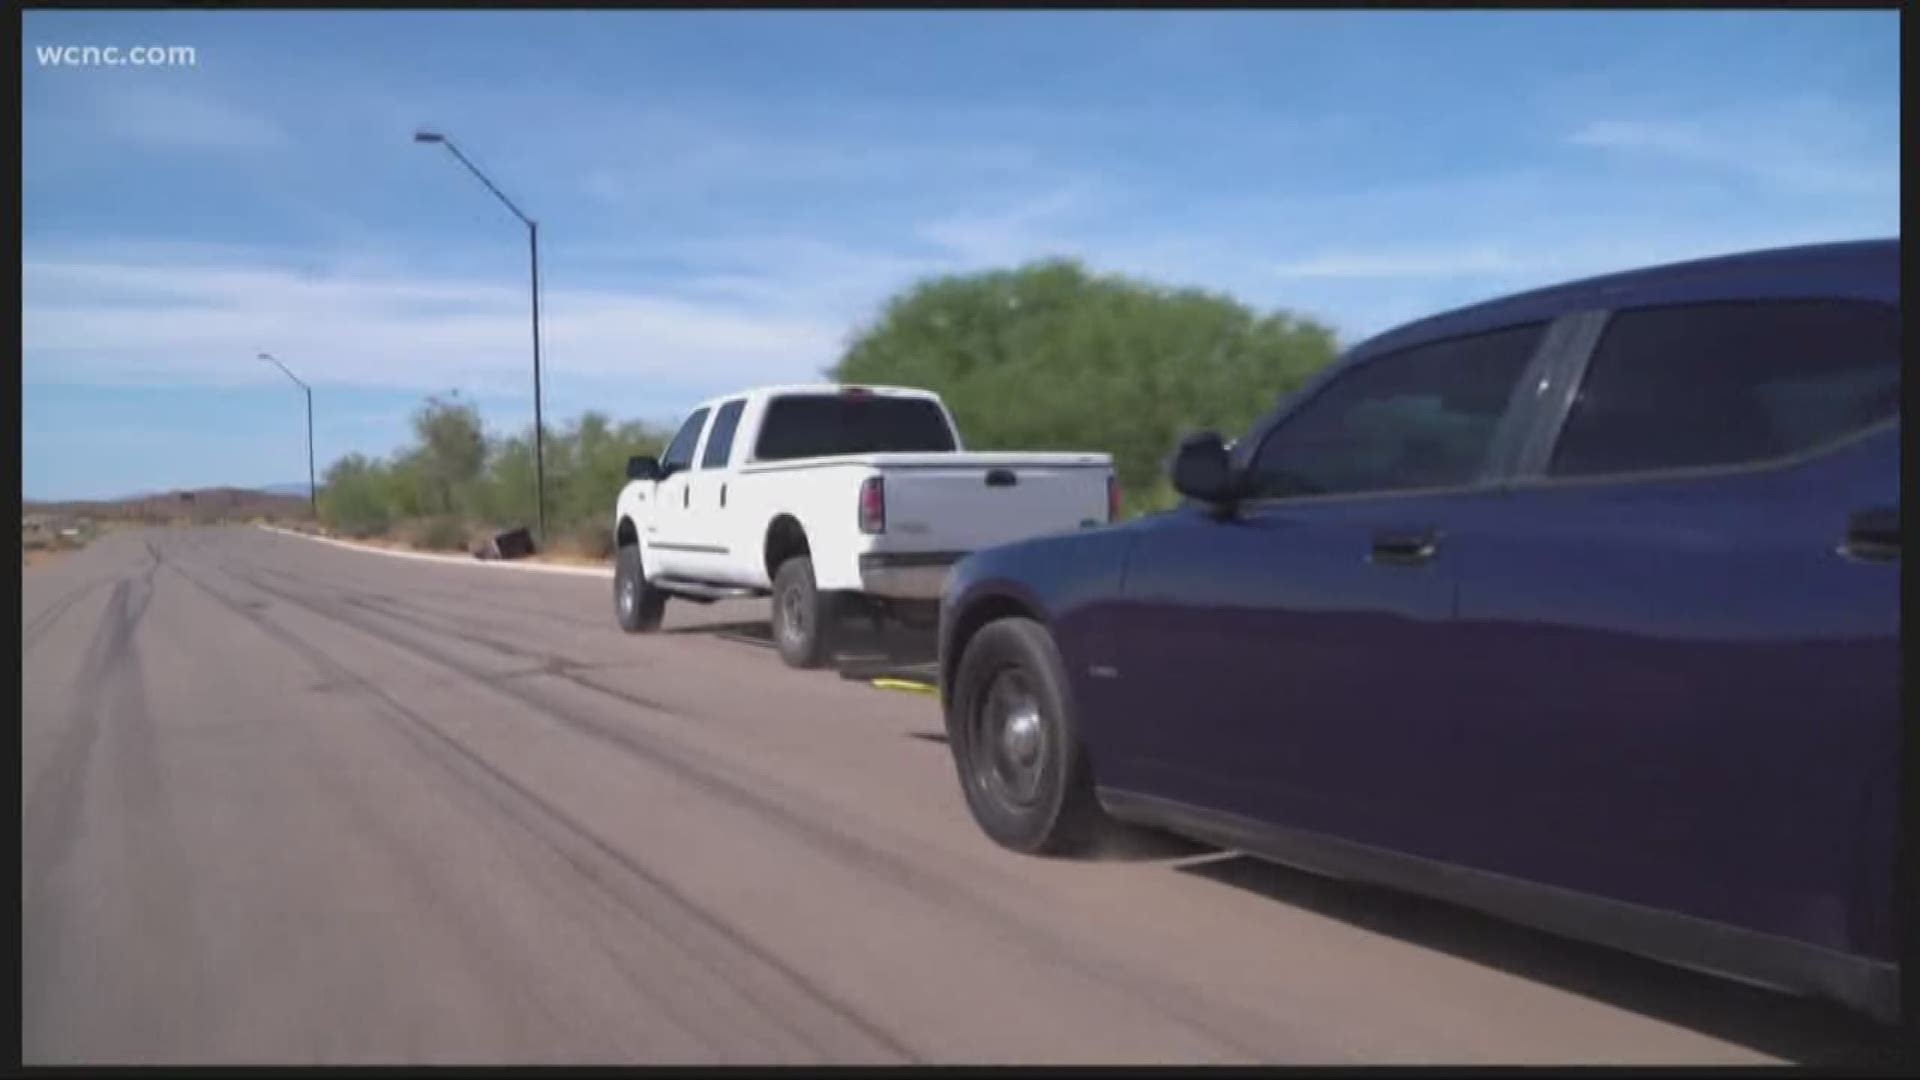 New tool helps end high speed chases safely